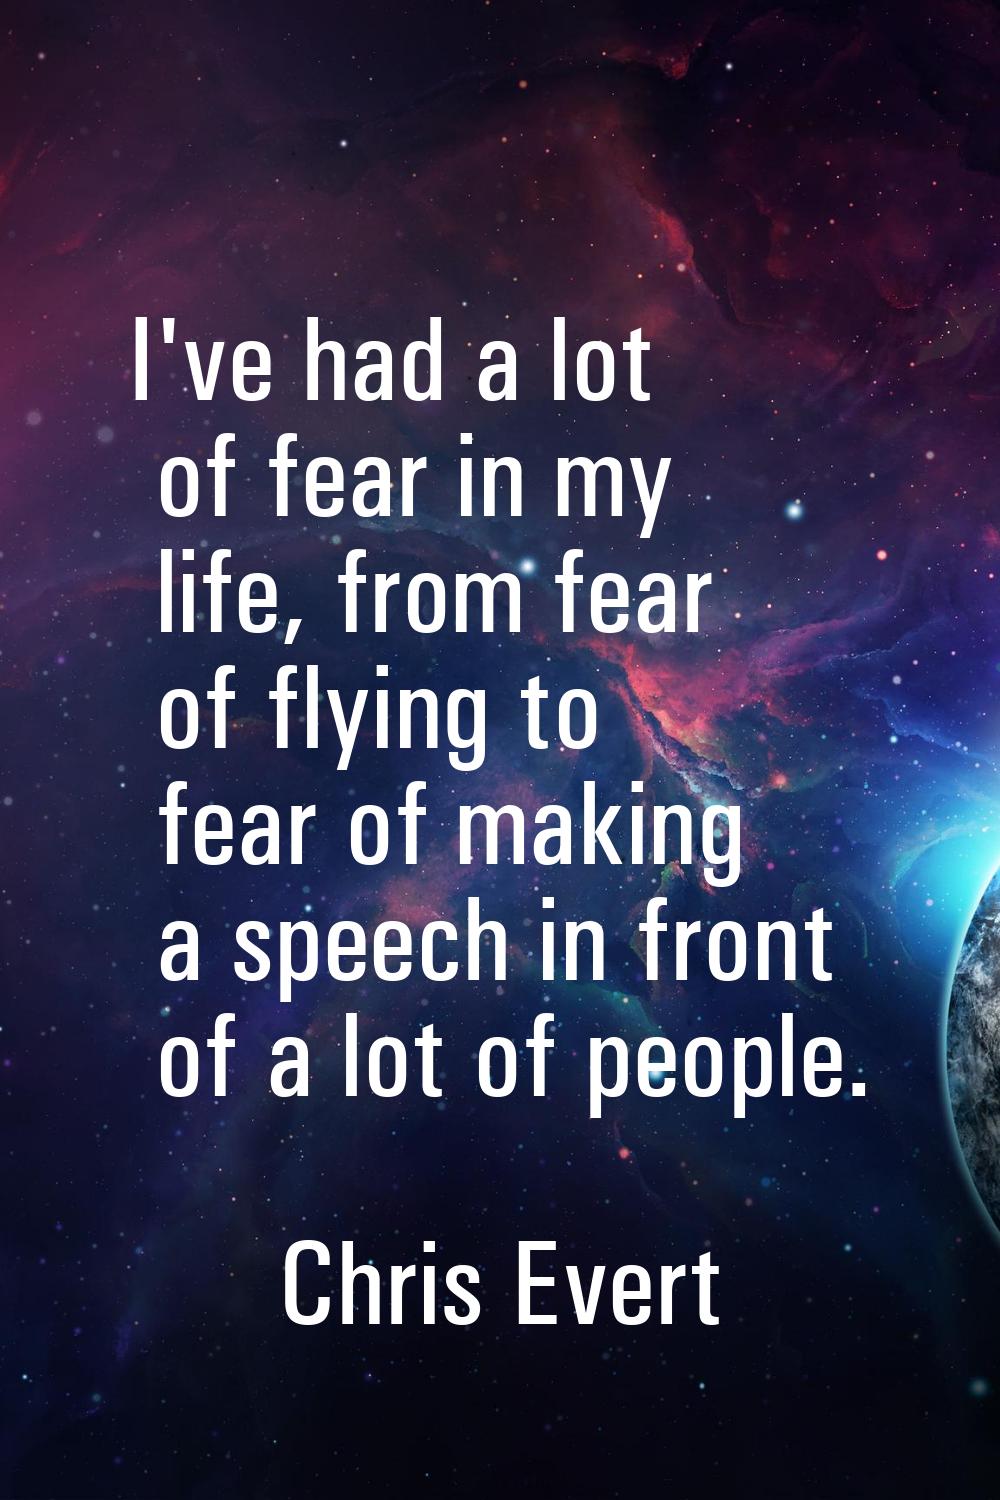 I've had a lot of fear in my life, from fear of flying to fear of making a speech in front of a lot